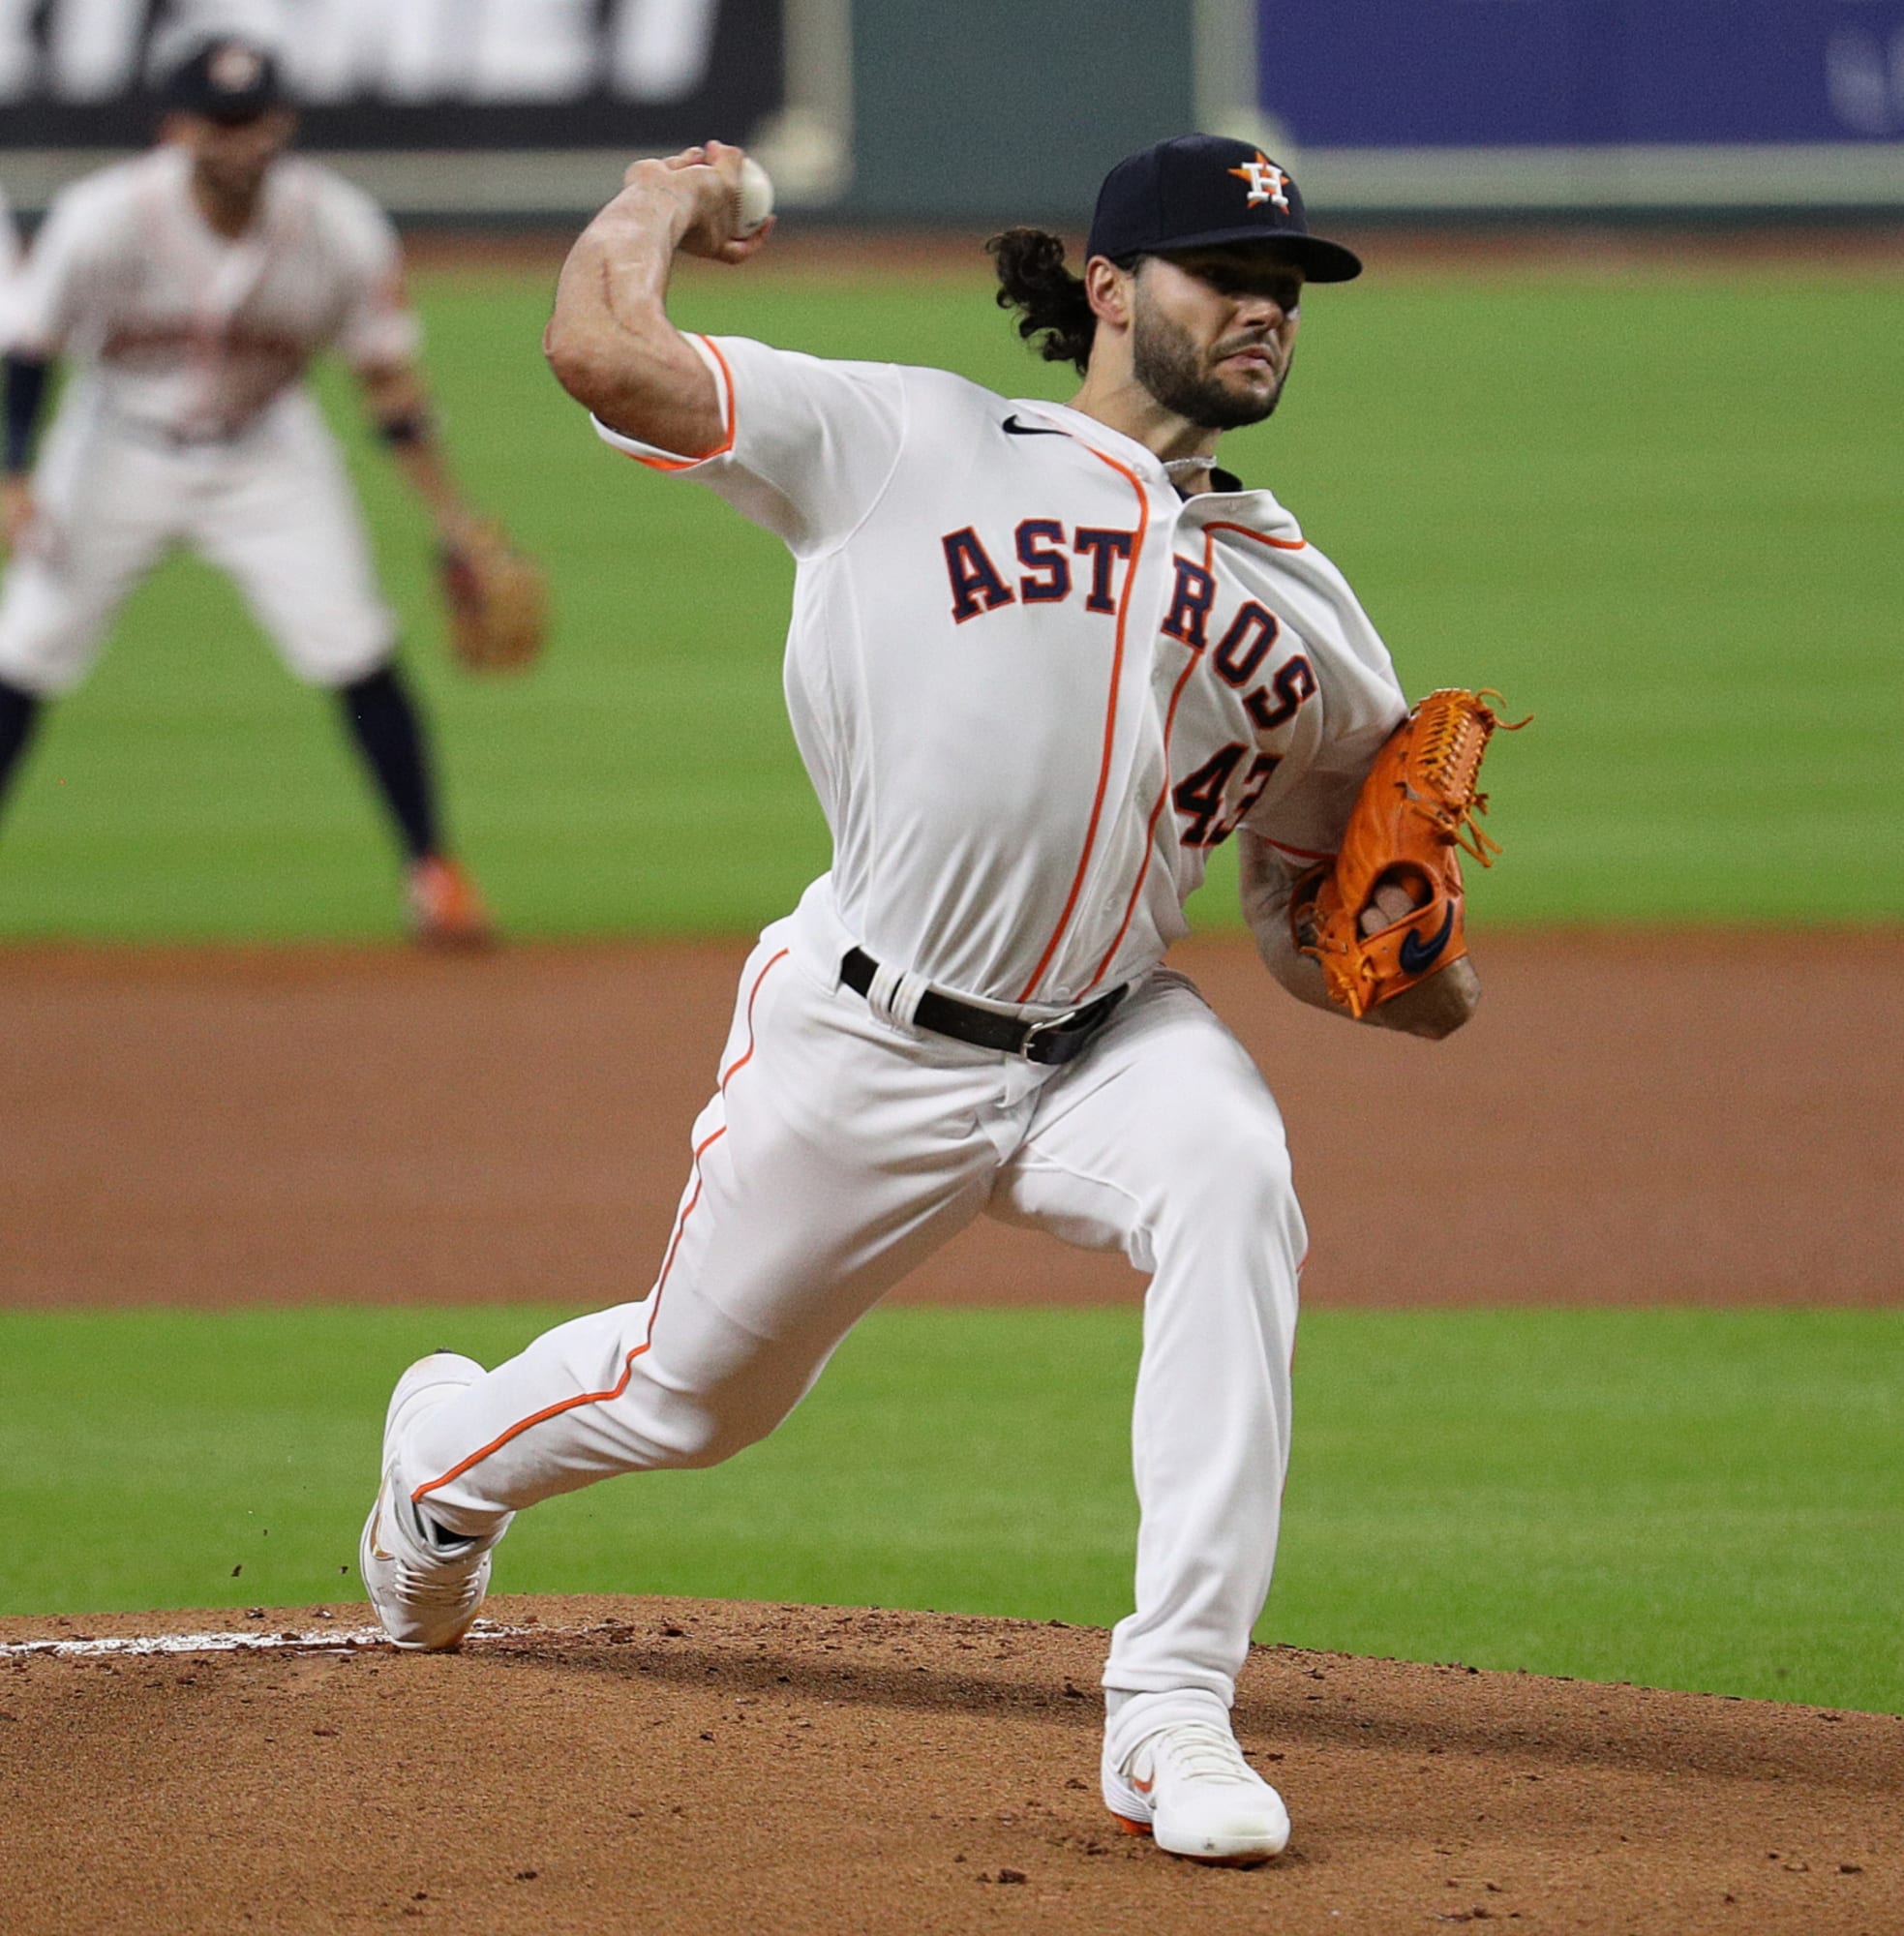 Lance McCullers Jr Spring Training Presser, Lance McCullers Jr. spoke  about his improved velocity and his readiness for the 2021 season., By  Houston Astros Highlights